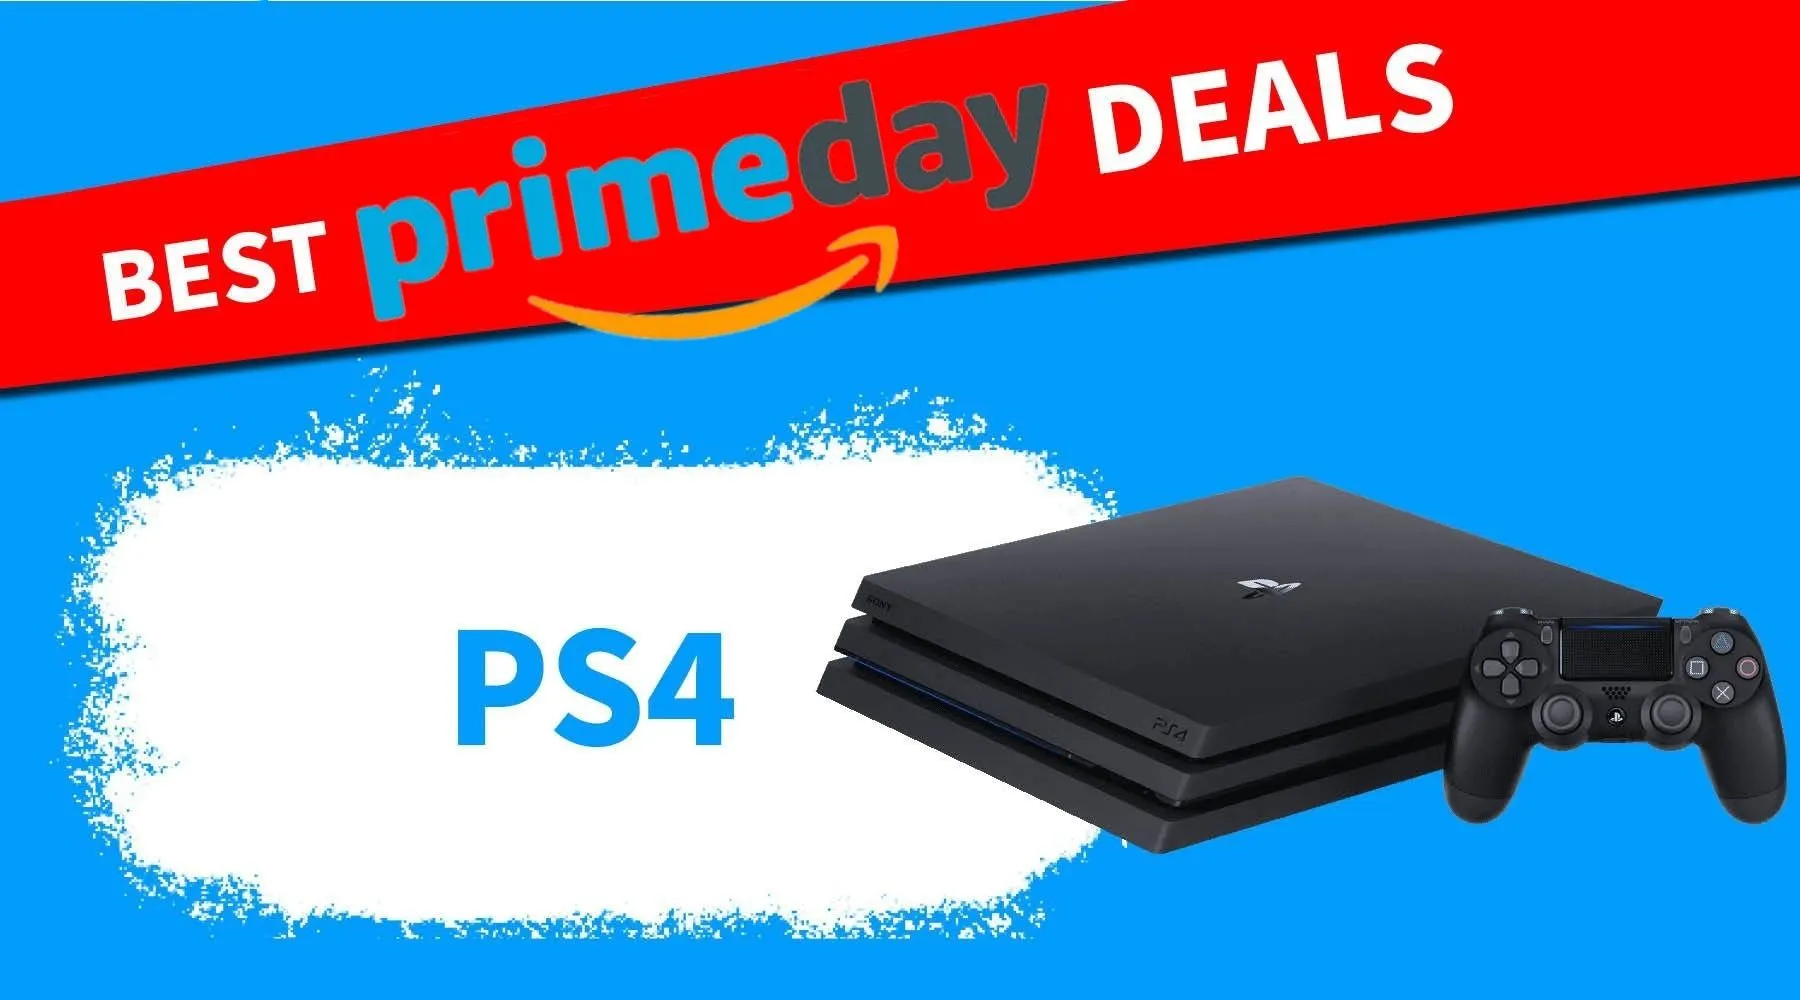 Tahiti bifald Bore Amazon Prime Day's best PlayStation 4 deals: Get 70% off | Finder